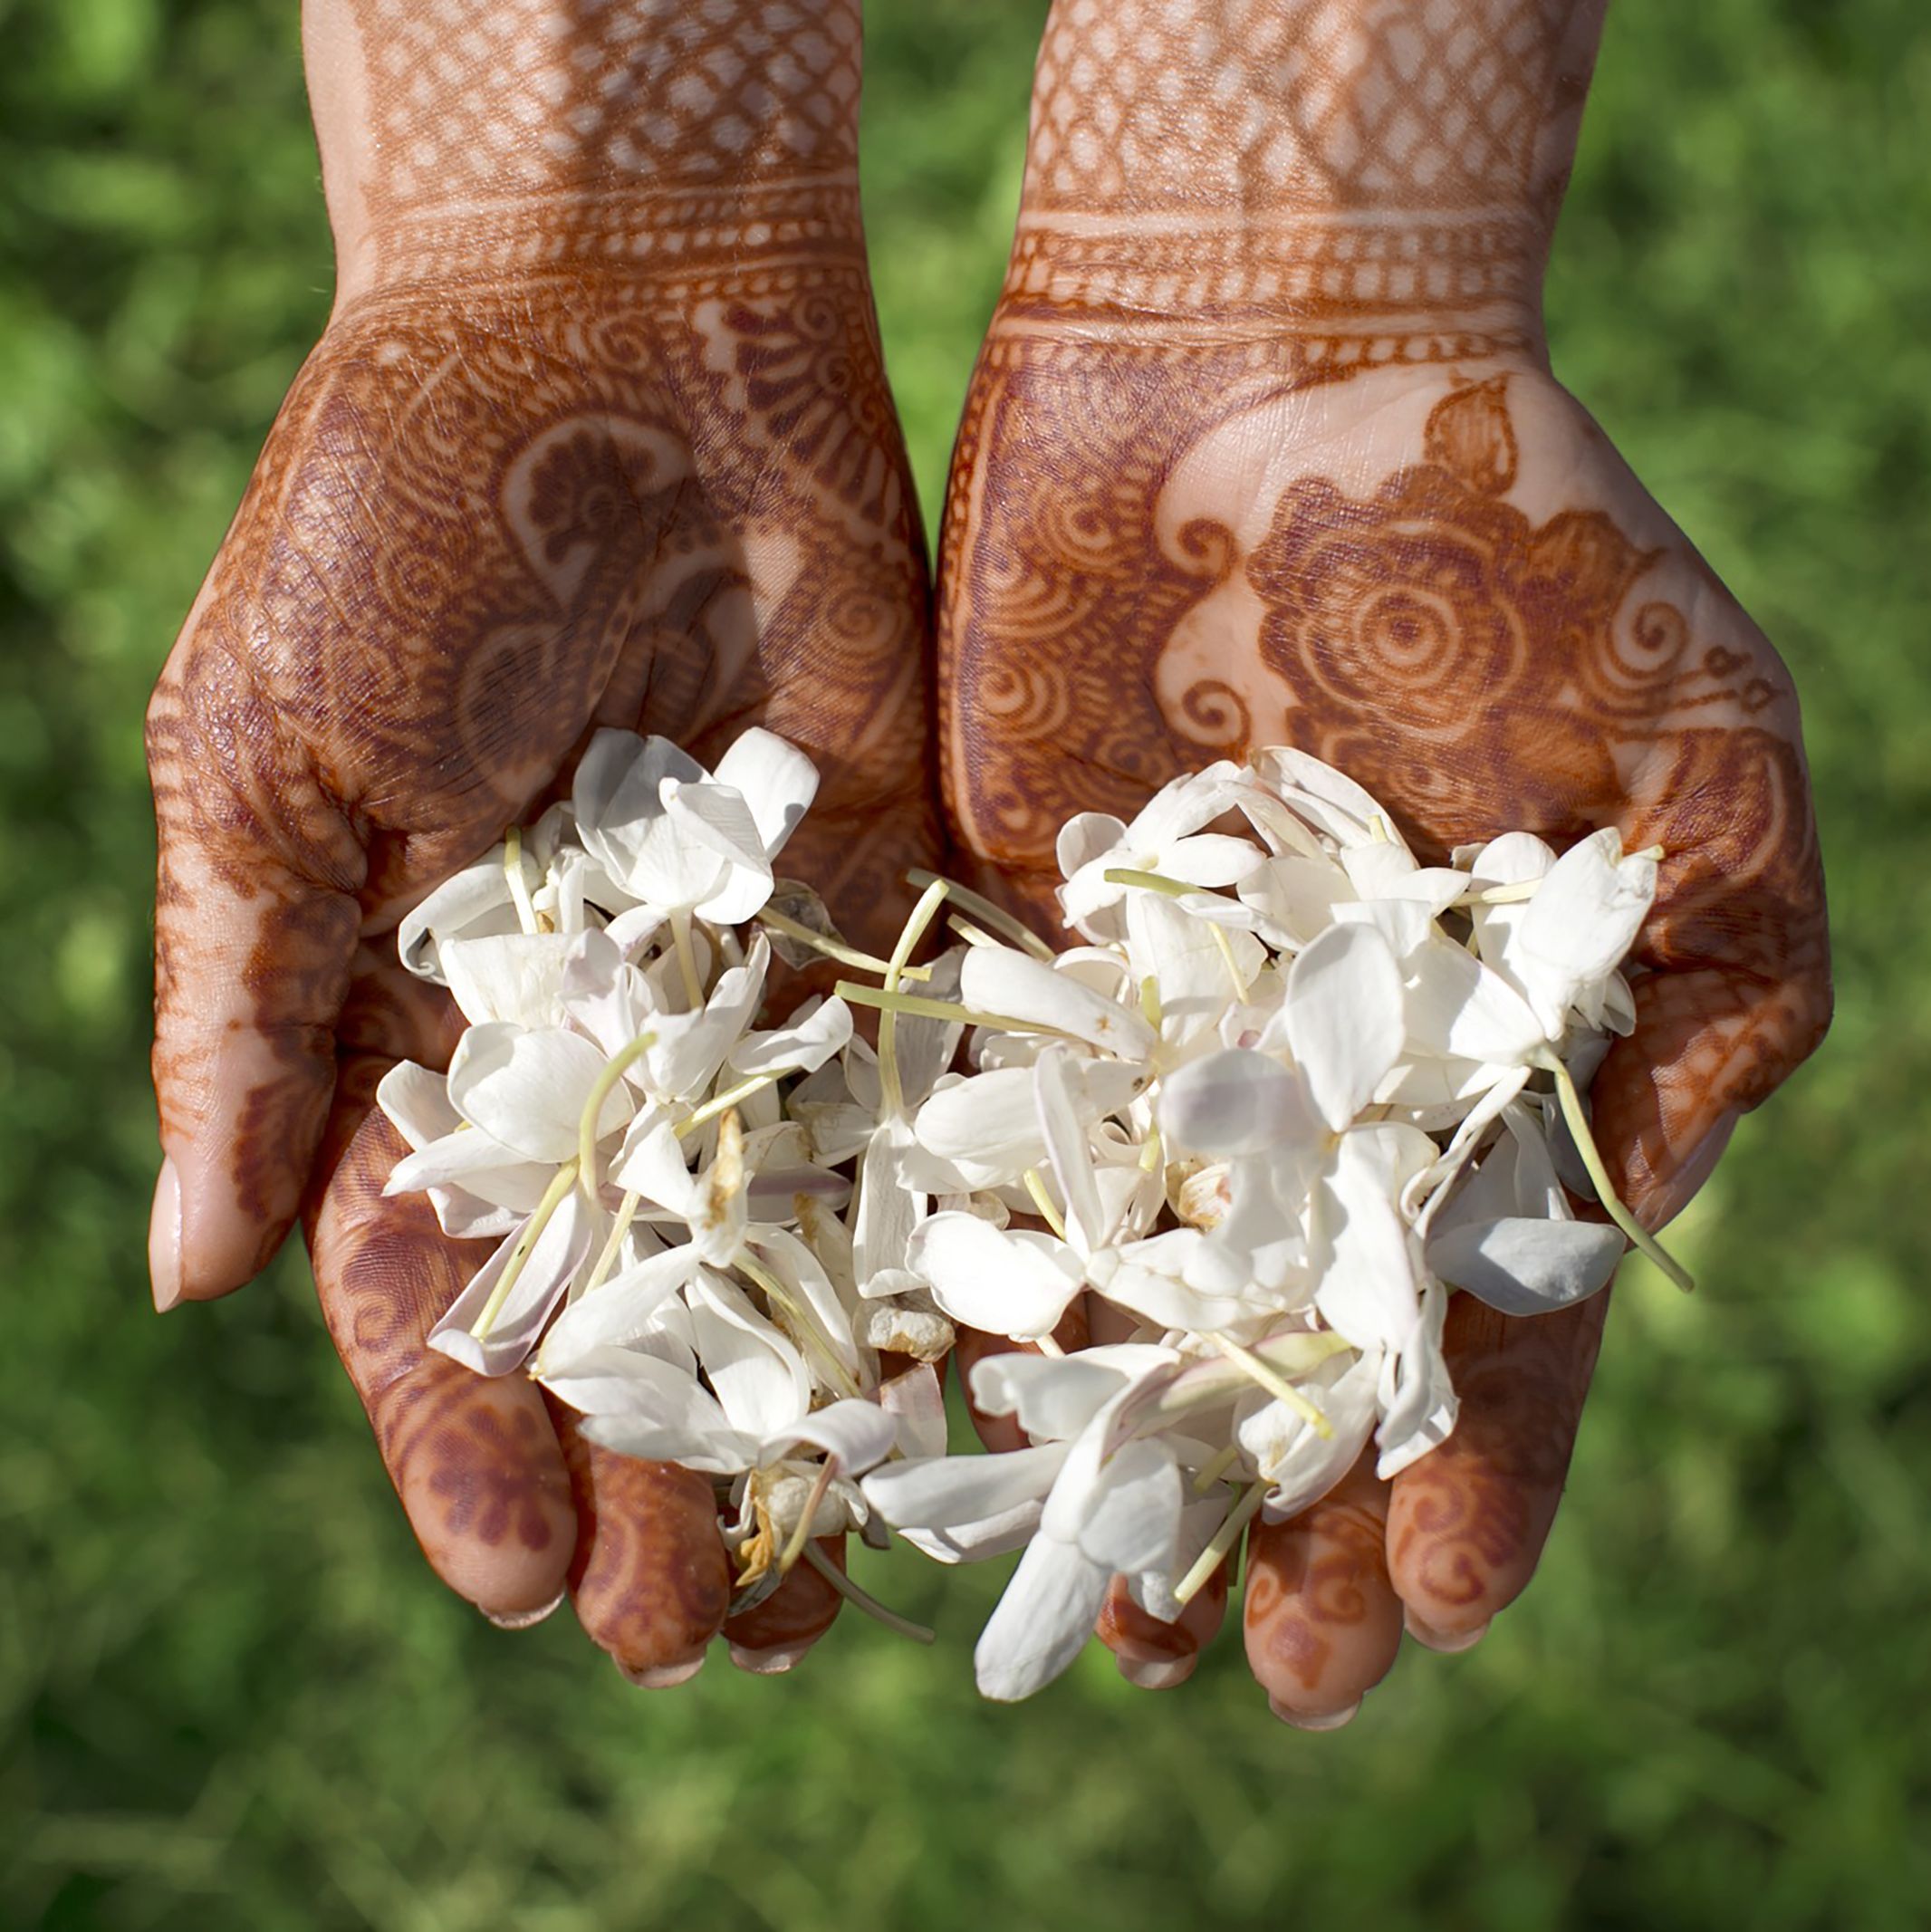 Basket of Chanel jasmine flowers Organic and picked by hand Future